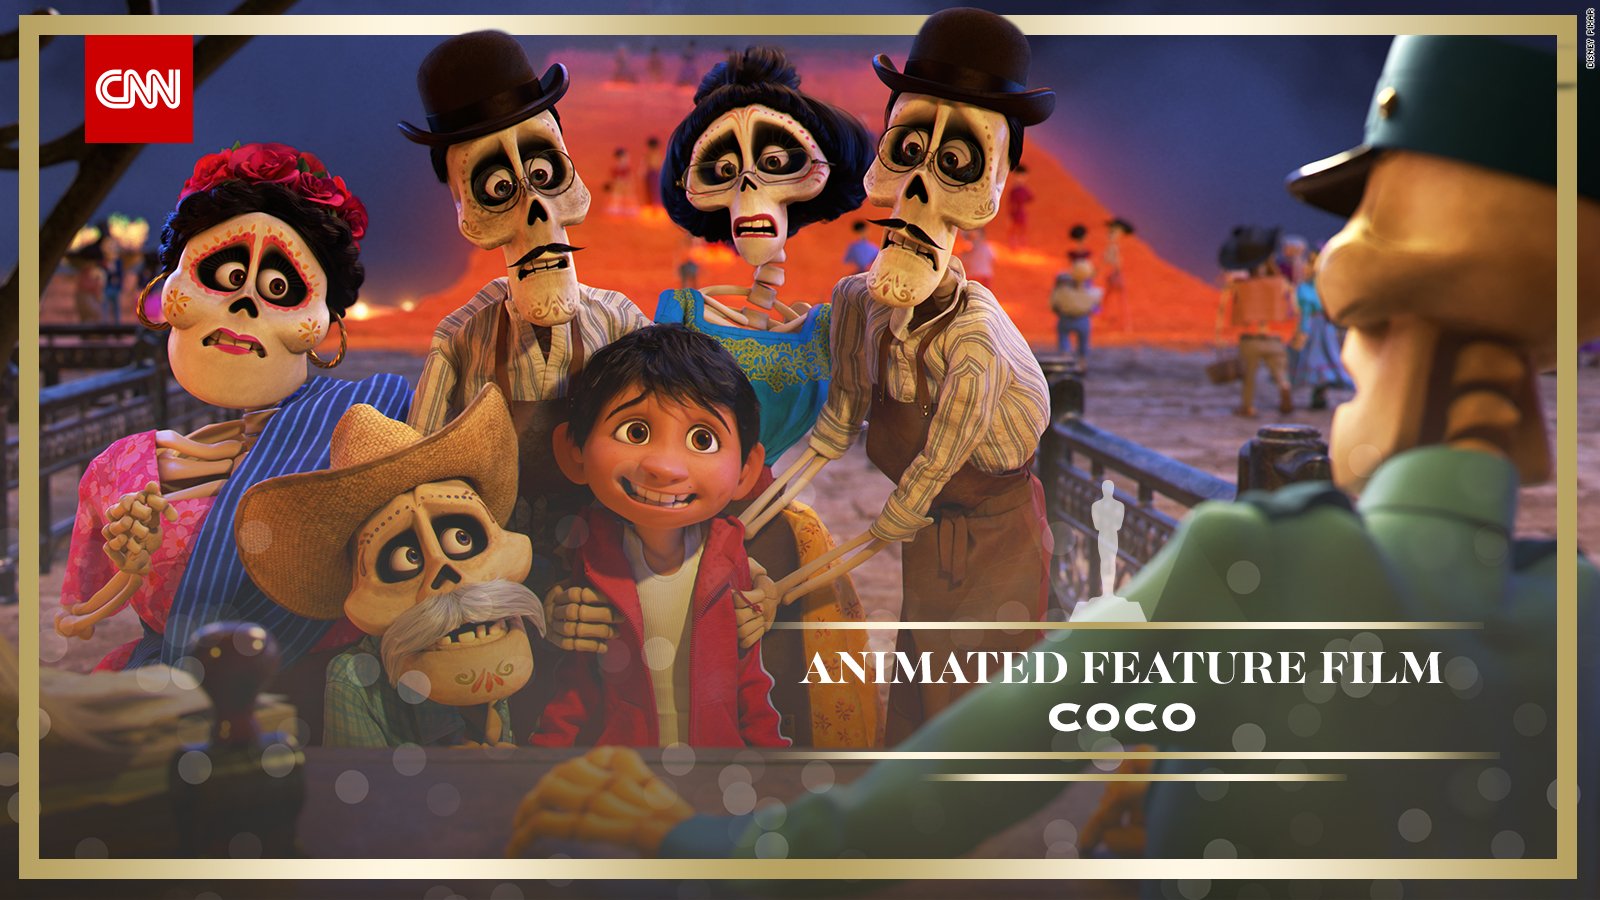 Coco wins best animated feature at Oscars 2018, Oscars 2018